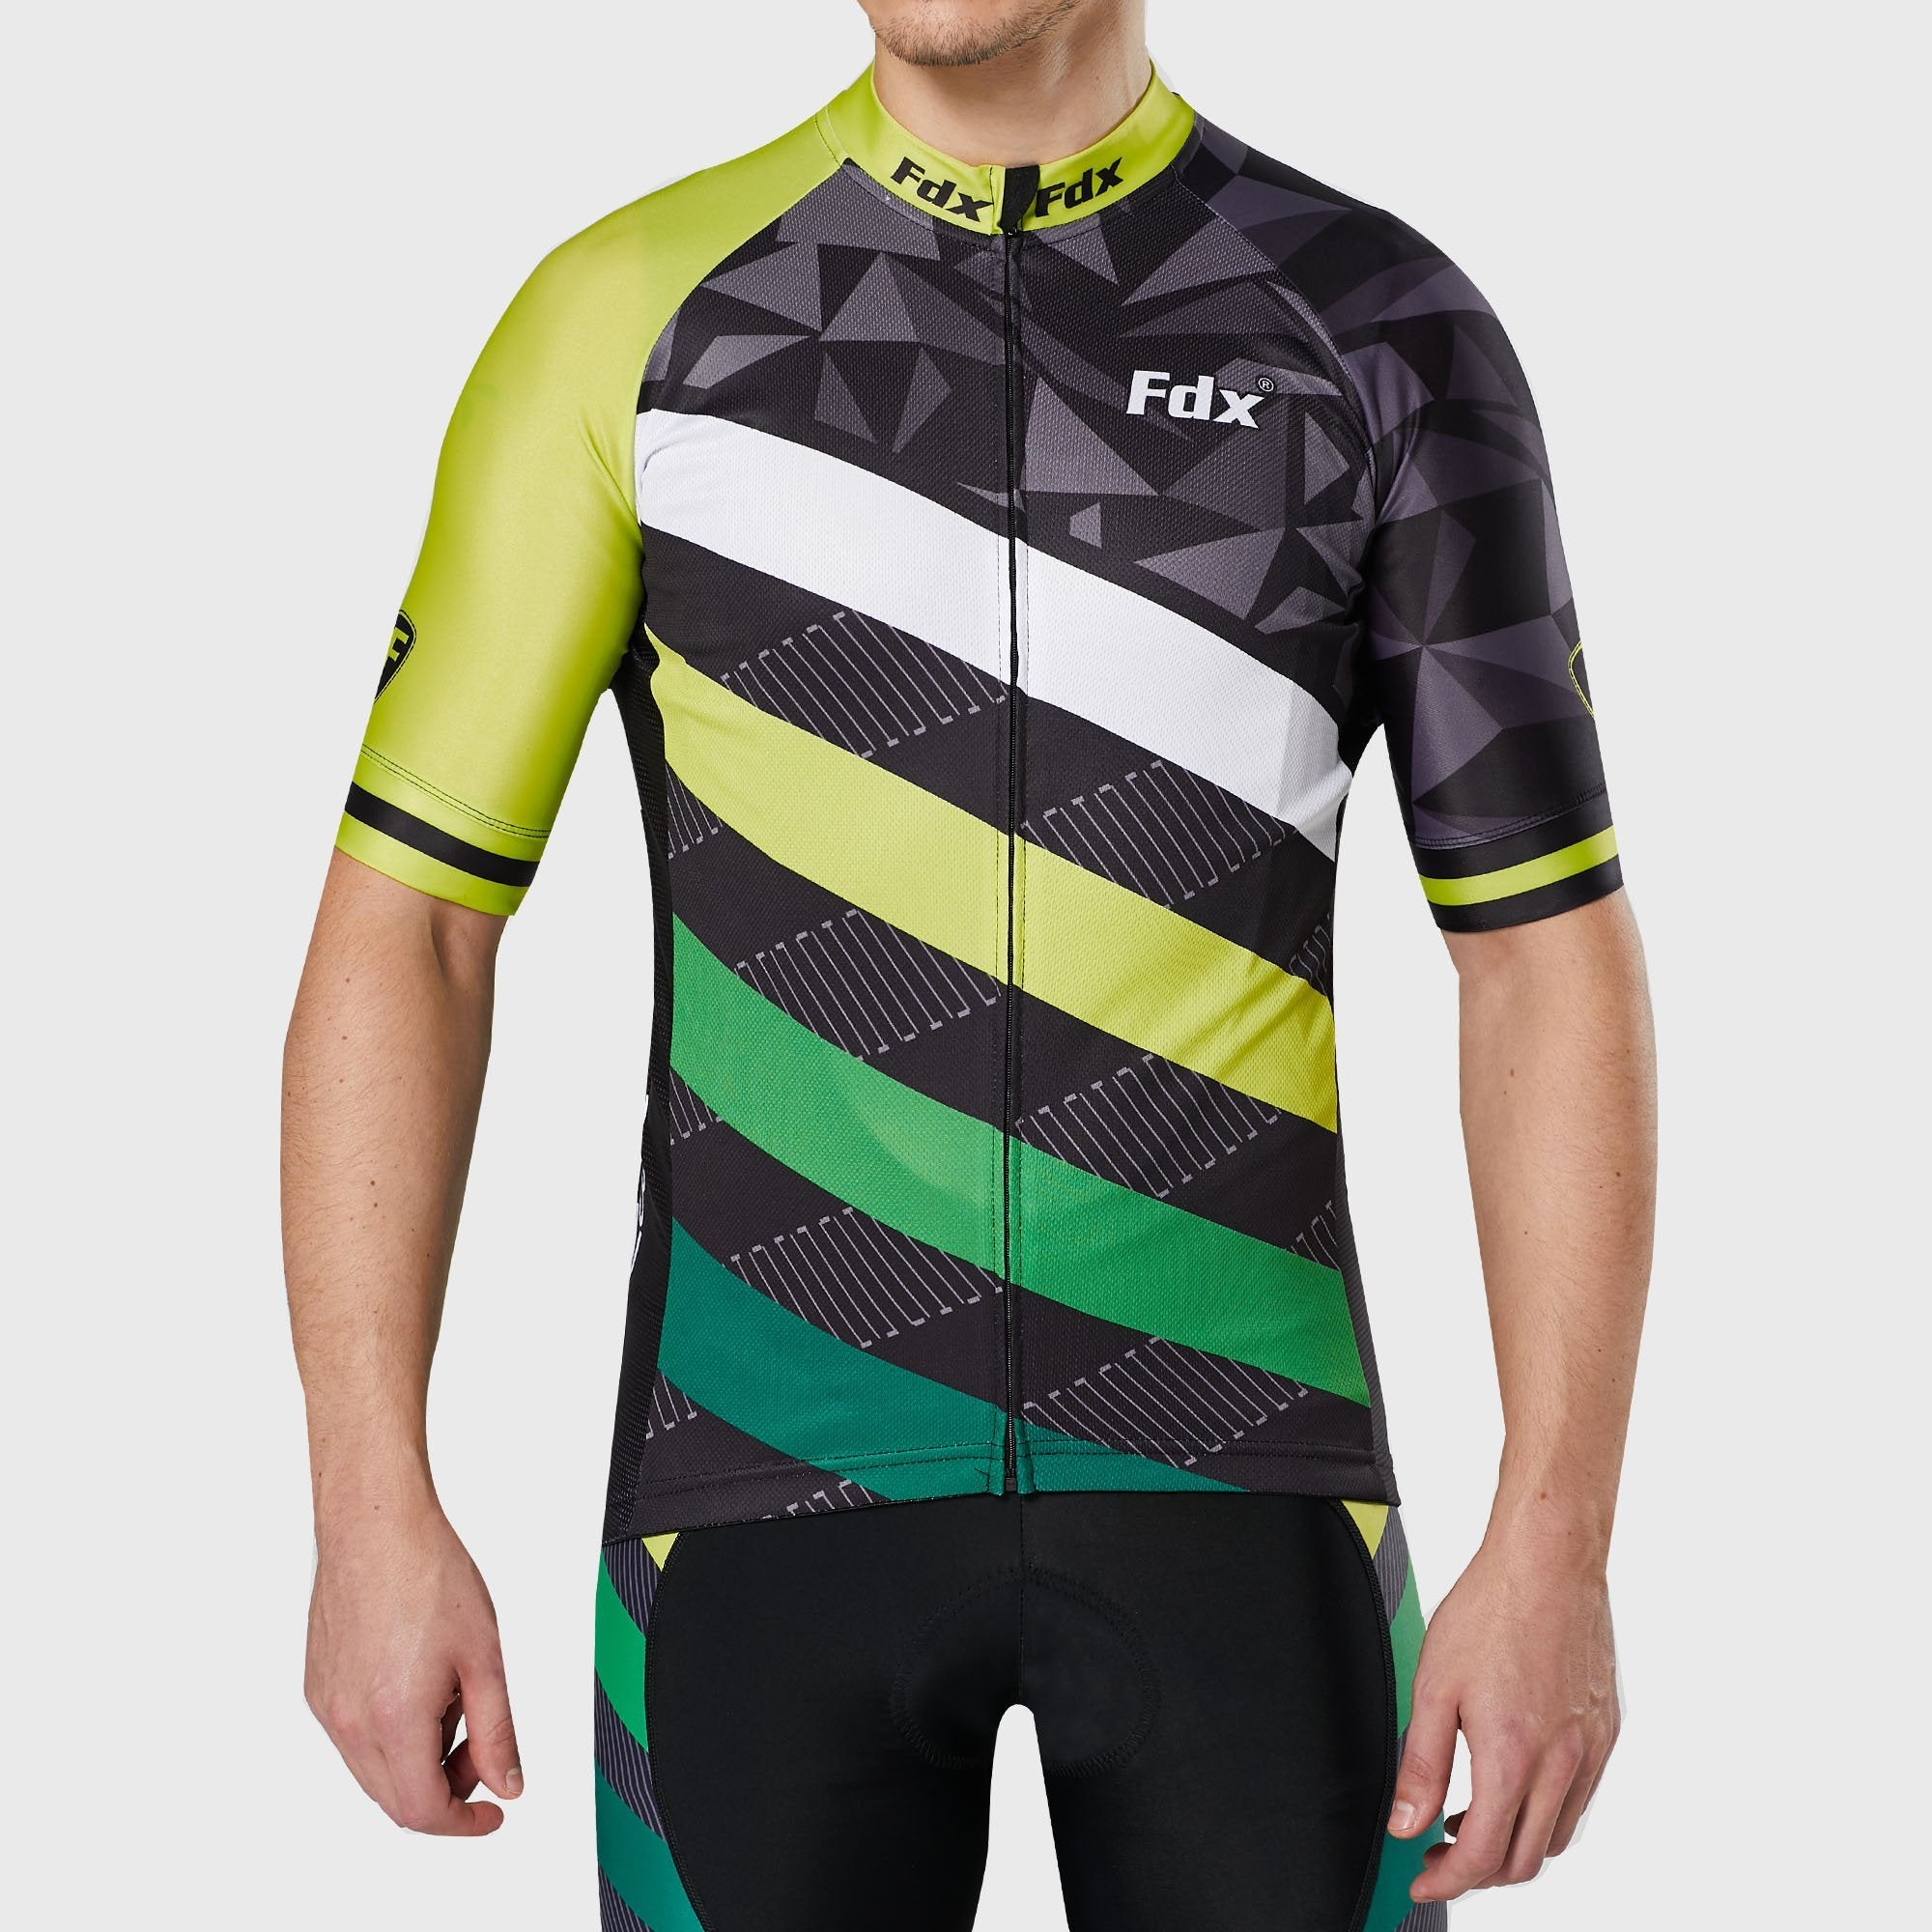 Fdx yellow & black men’s full zip best short sleeves cycling jersey Hi-Viz Reflective details breathable summer lightweight biking top, skin friendly Hi-Viz Reflective half sleeves cycling shirt for indoor & outdoor riding with two back pockets